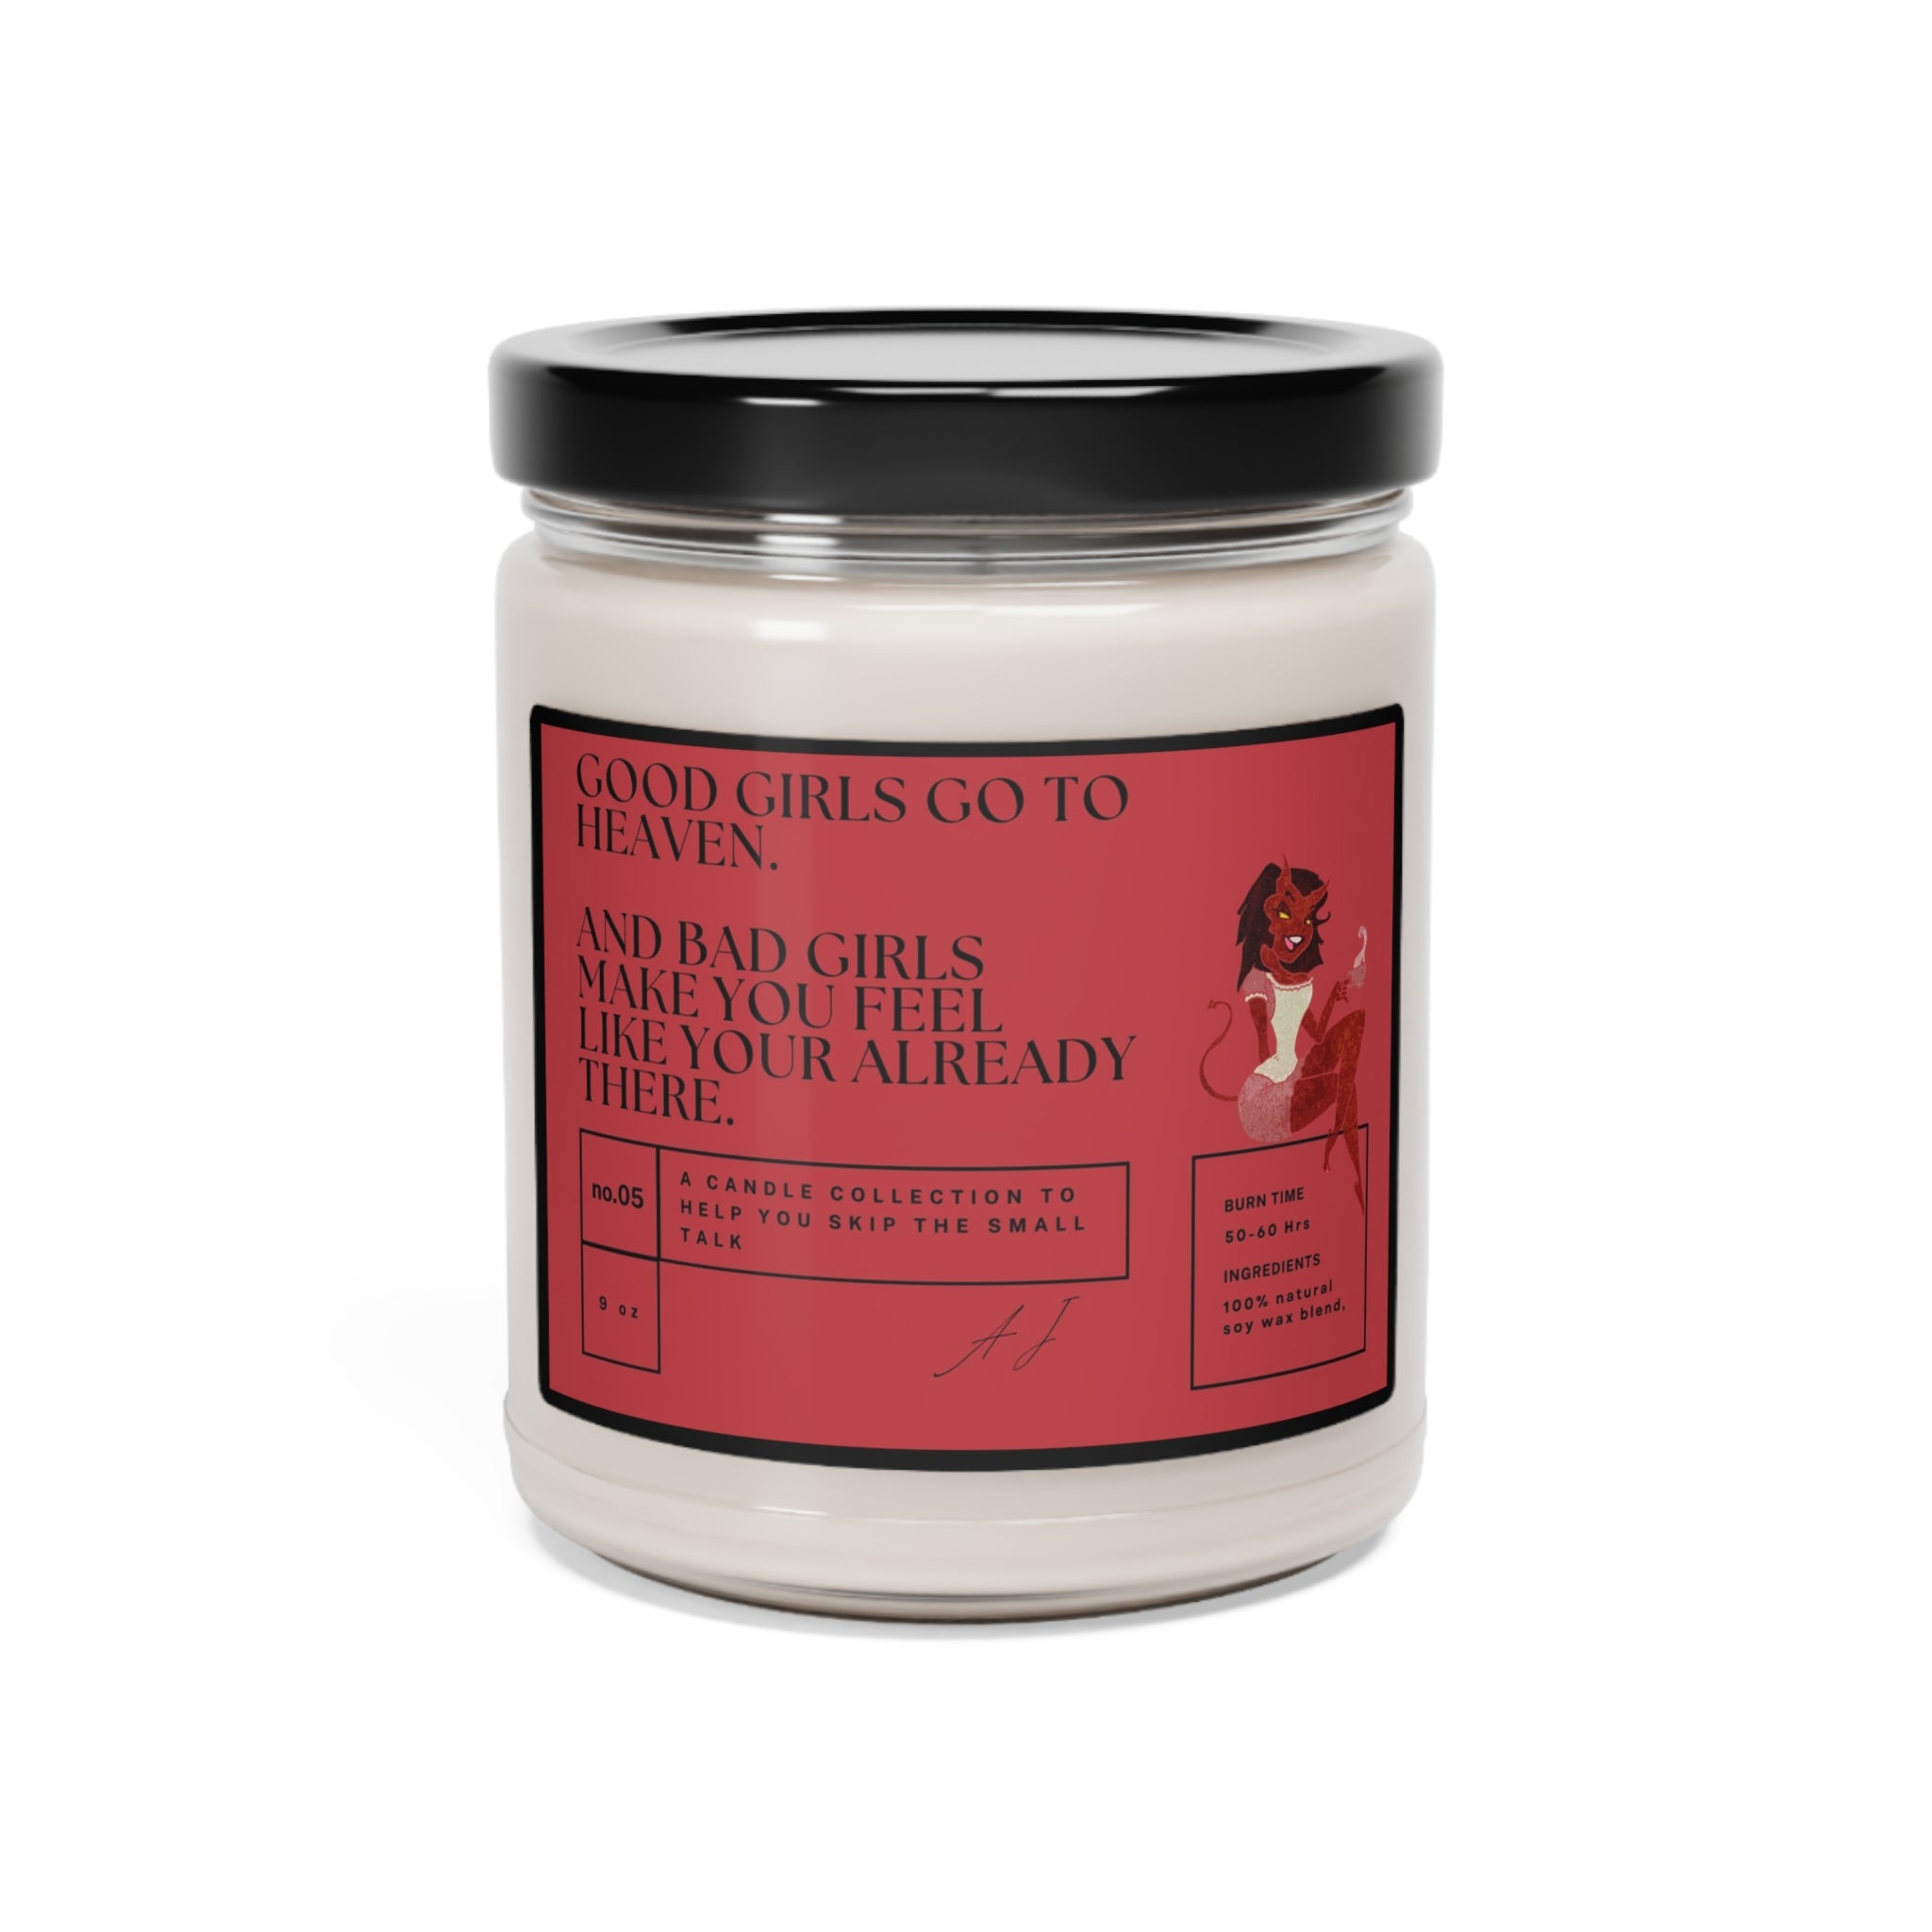 Bad Girl Eco Friendly Scented Soy Candle, 9oz